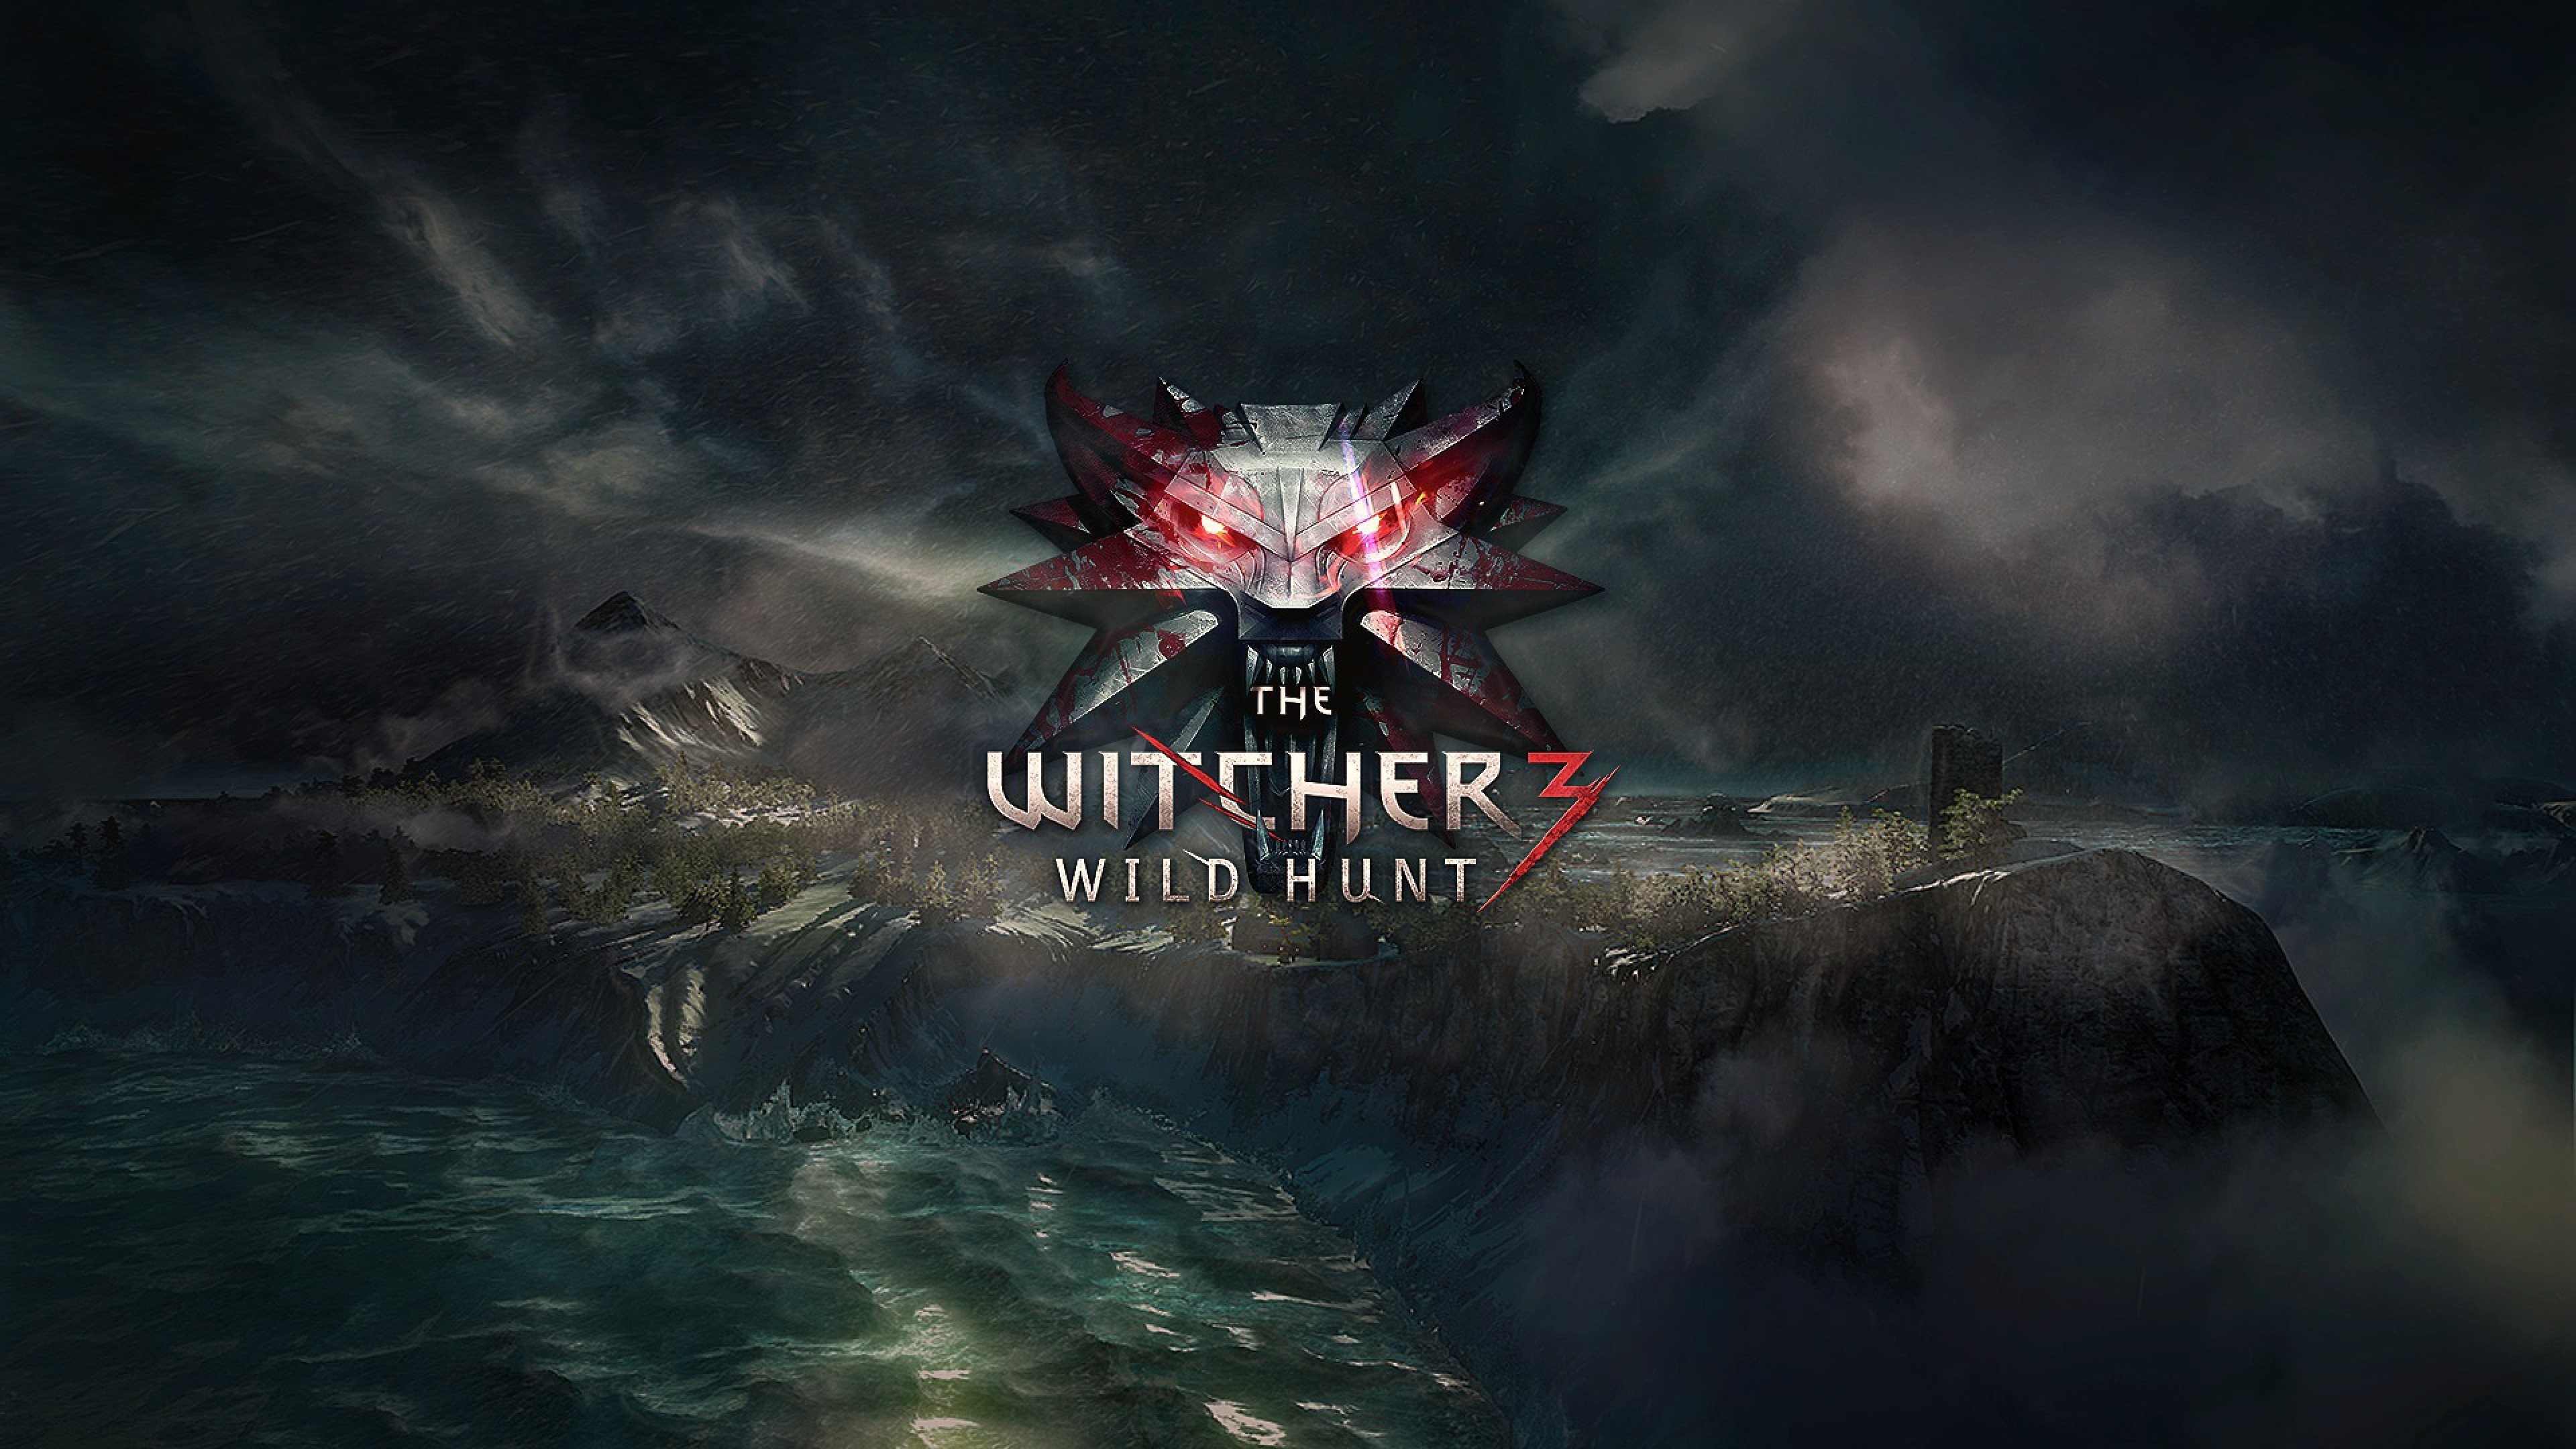 the witcher 3 wallpaper 4k,action adventure game,darkness,pc game,games,strategy video game